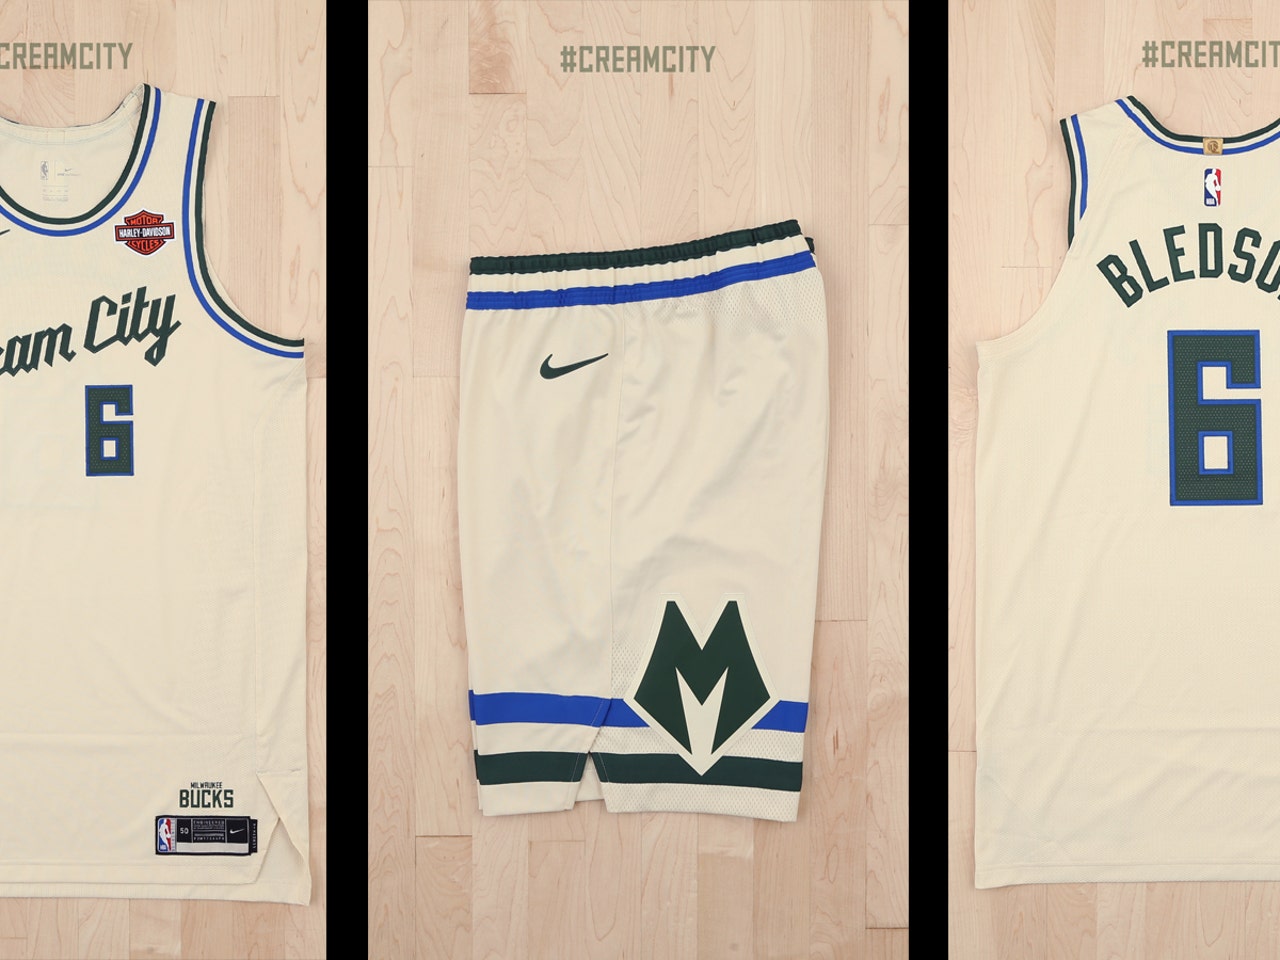 I created two City-Edition jerseys for the Bucks based on the